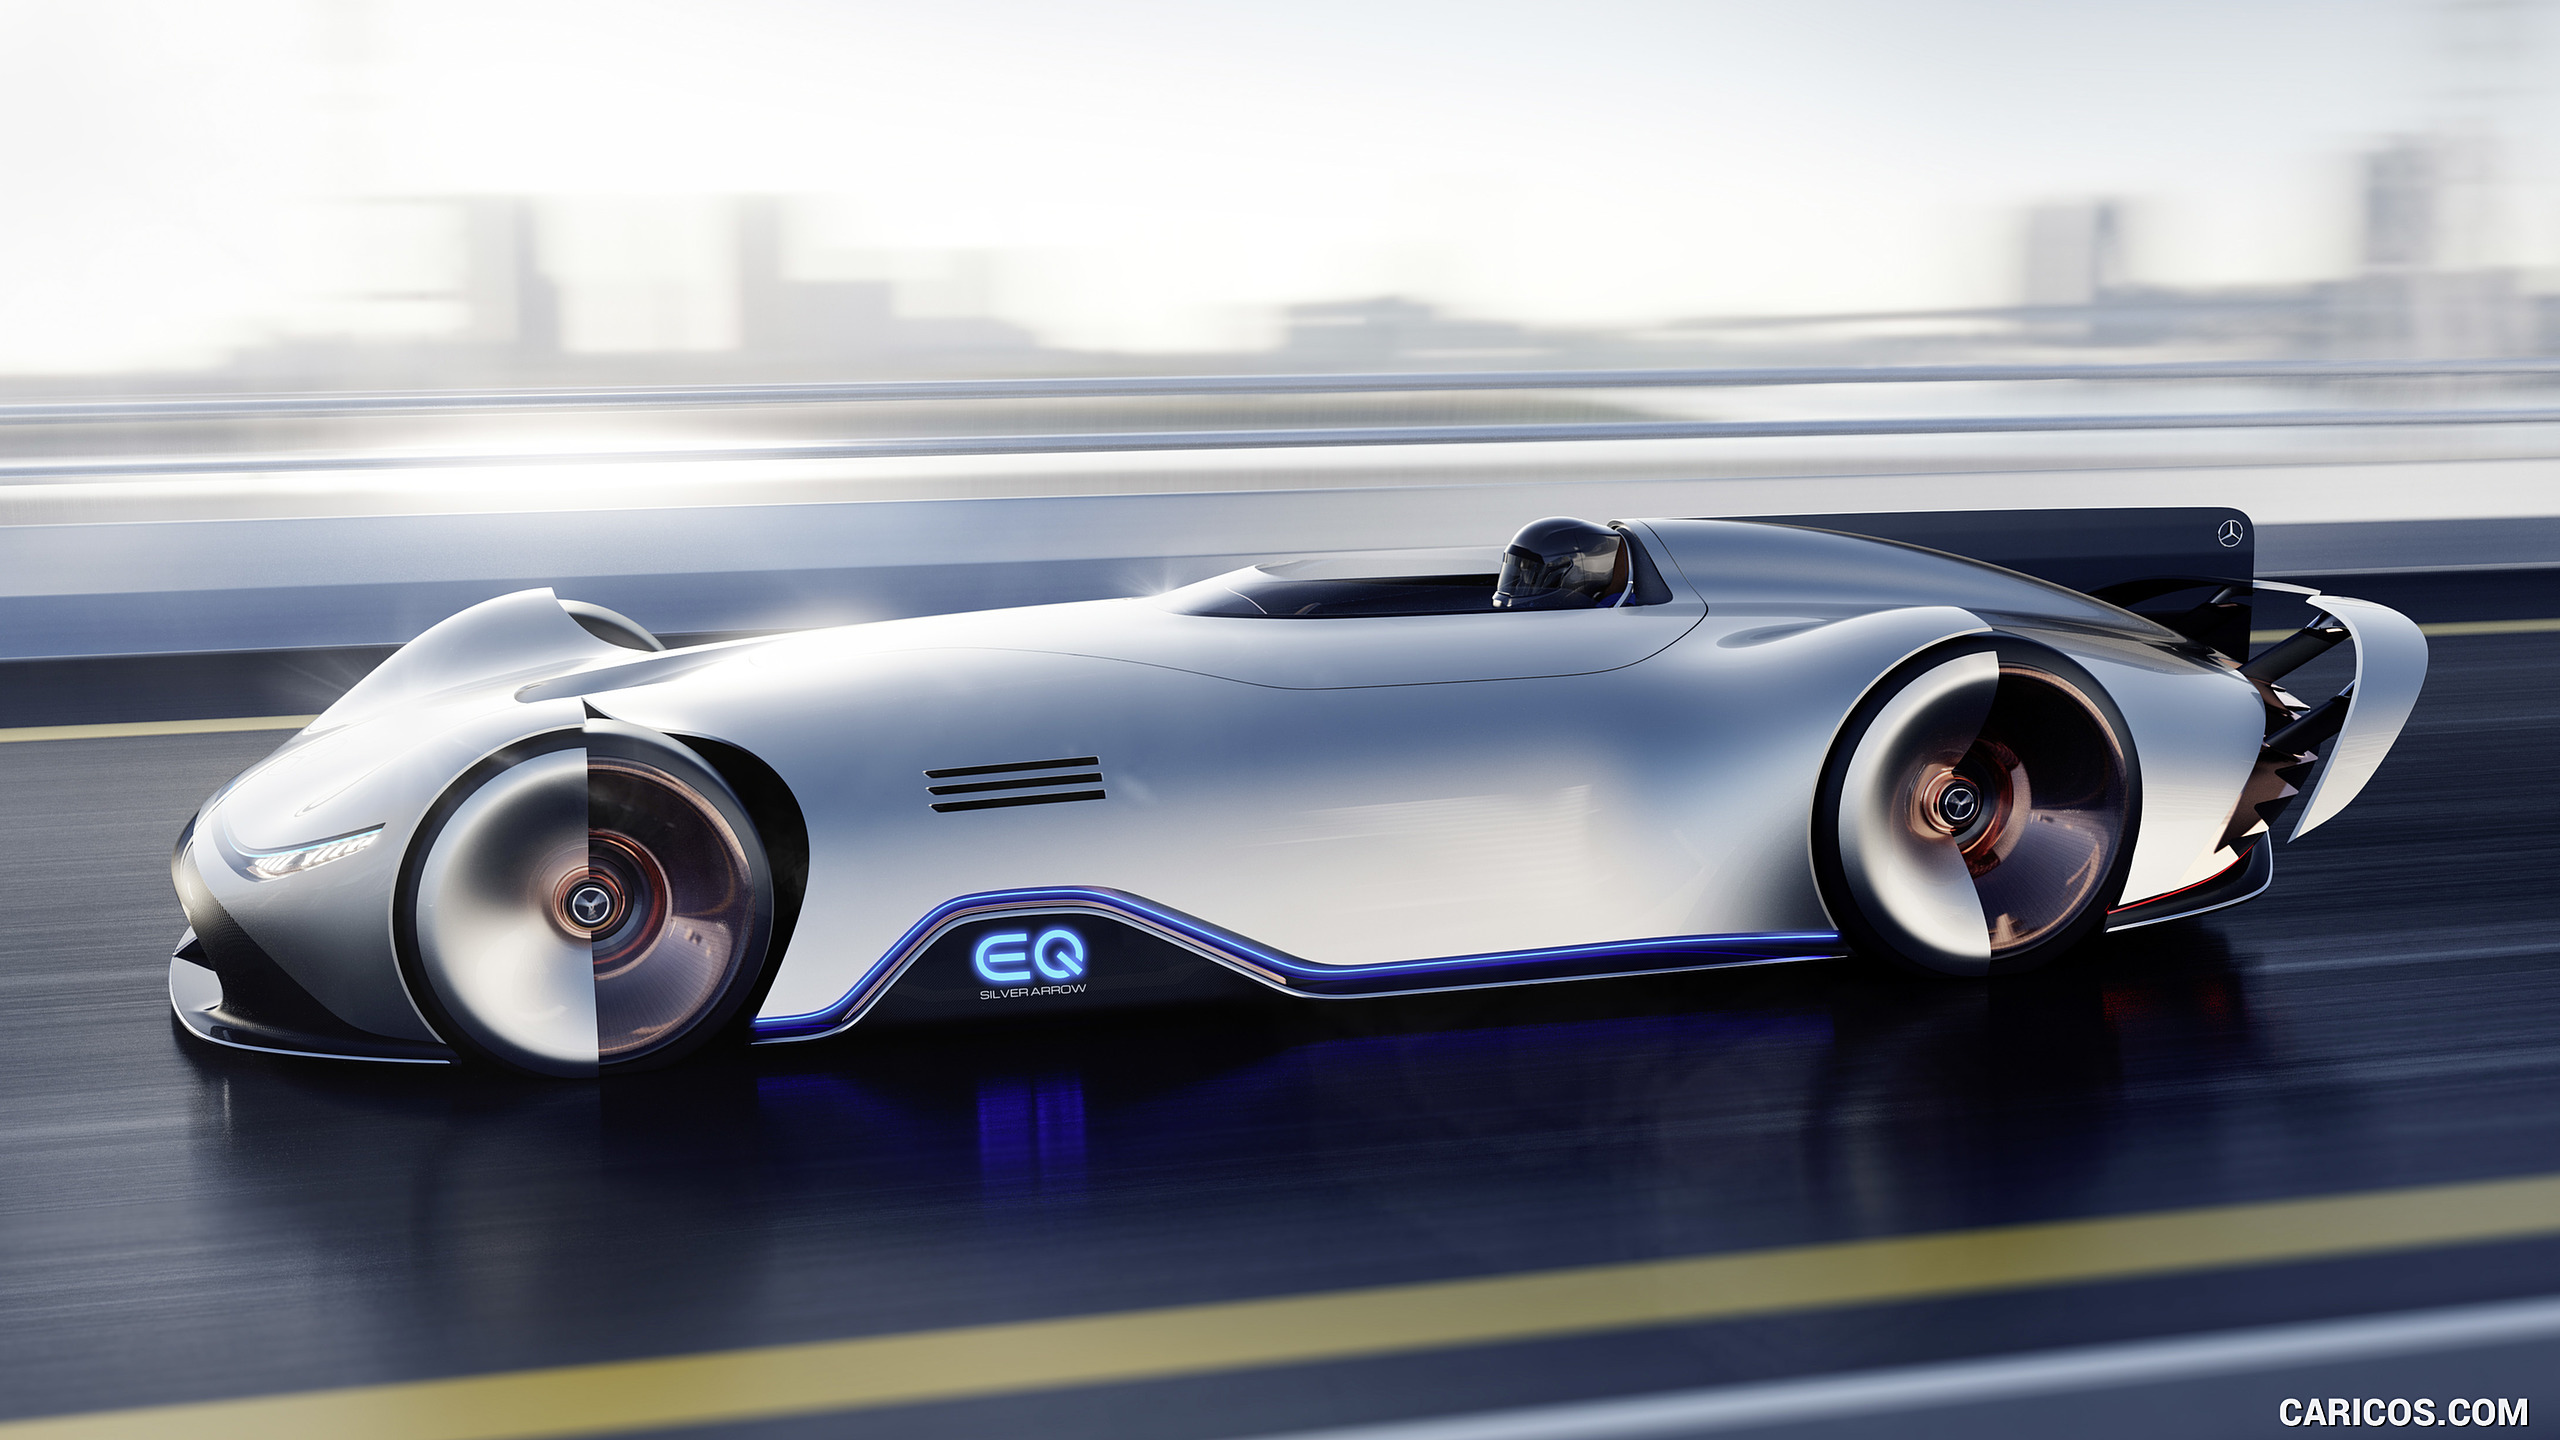 2018 Mercedes-Benz Vision EQ Silver Arrow Concept - Side, #28 of 50